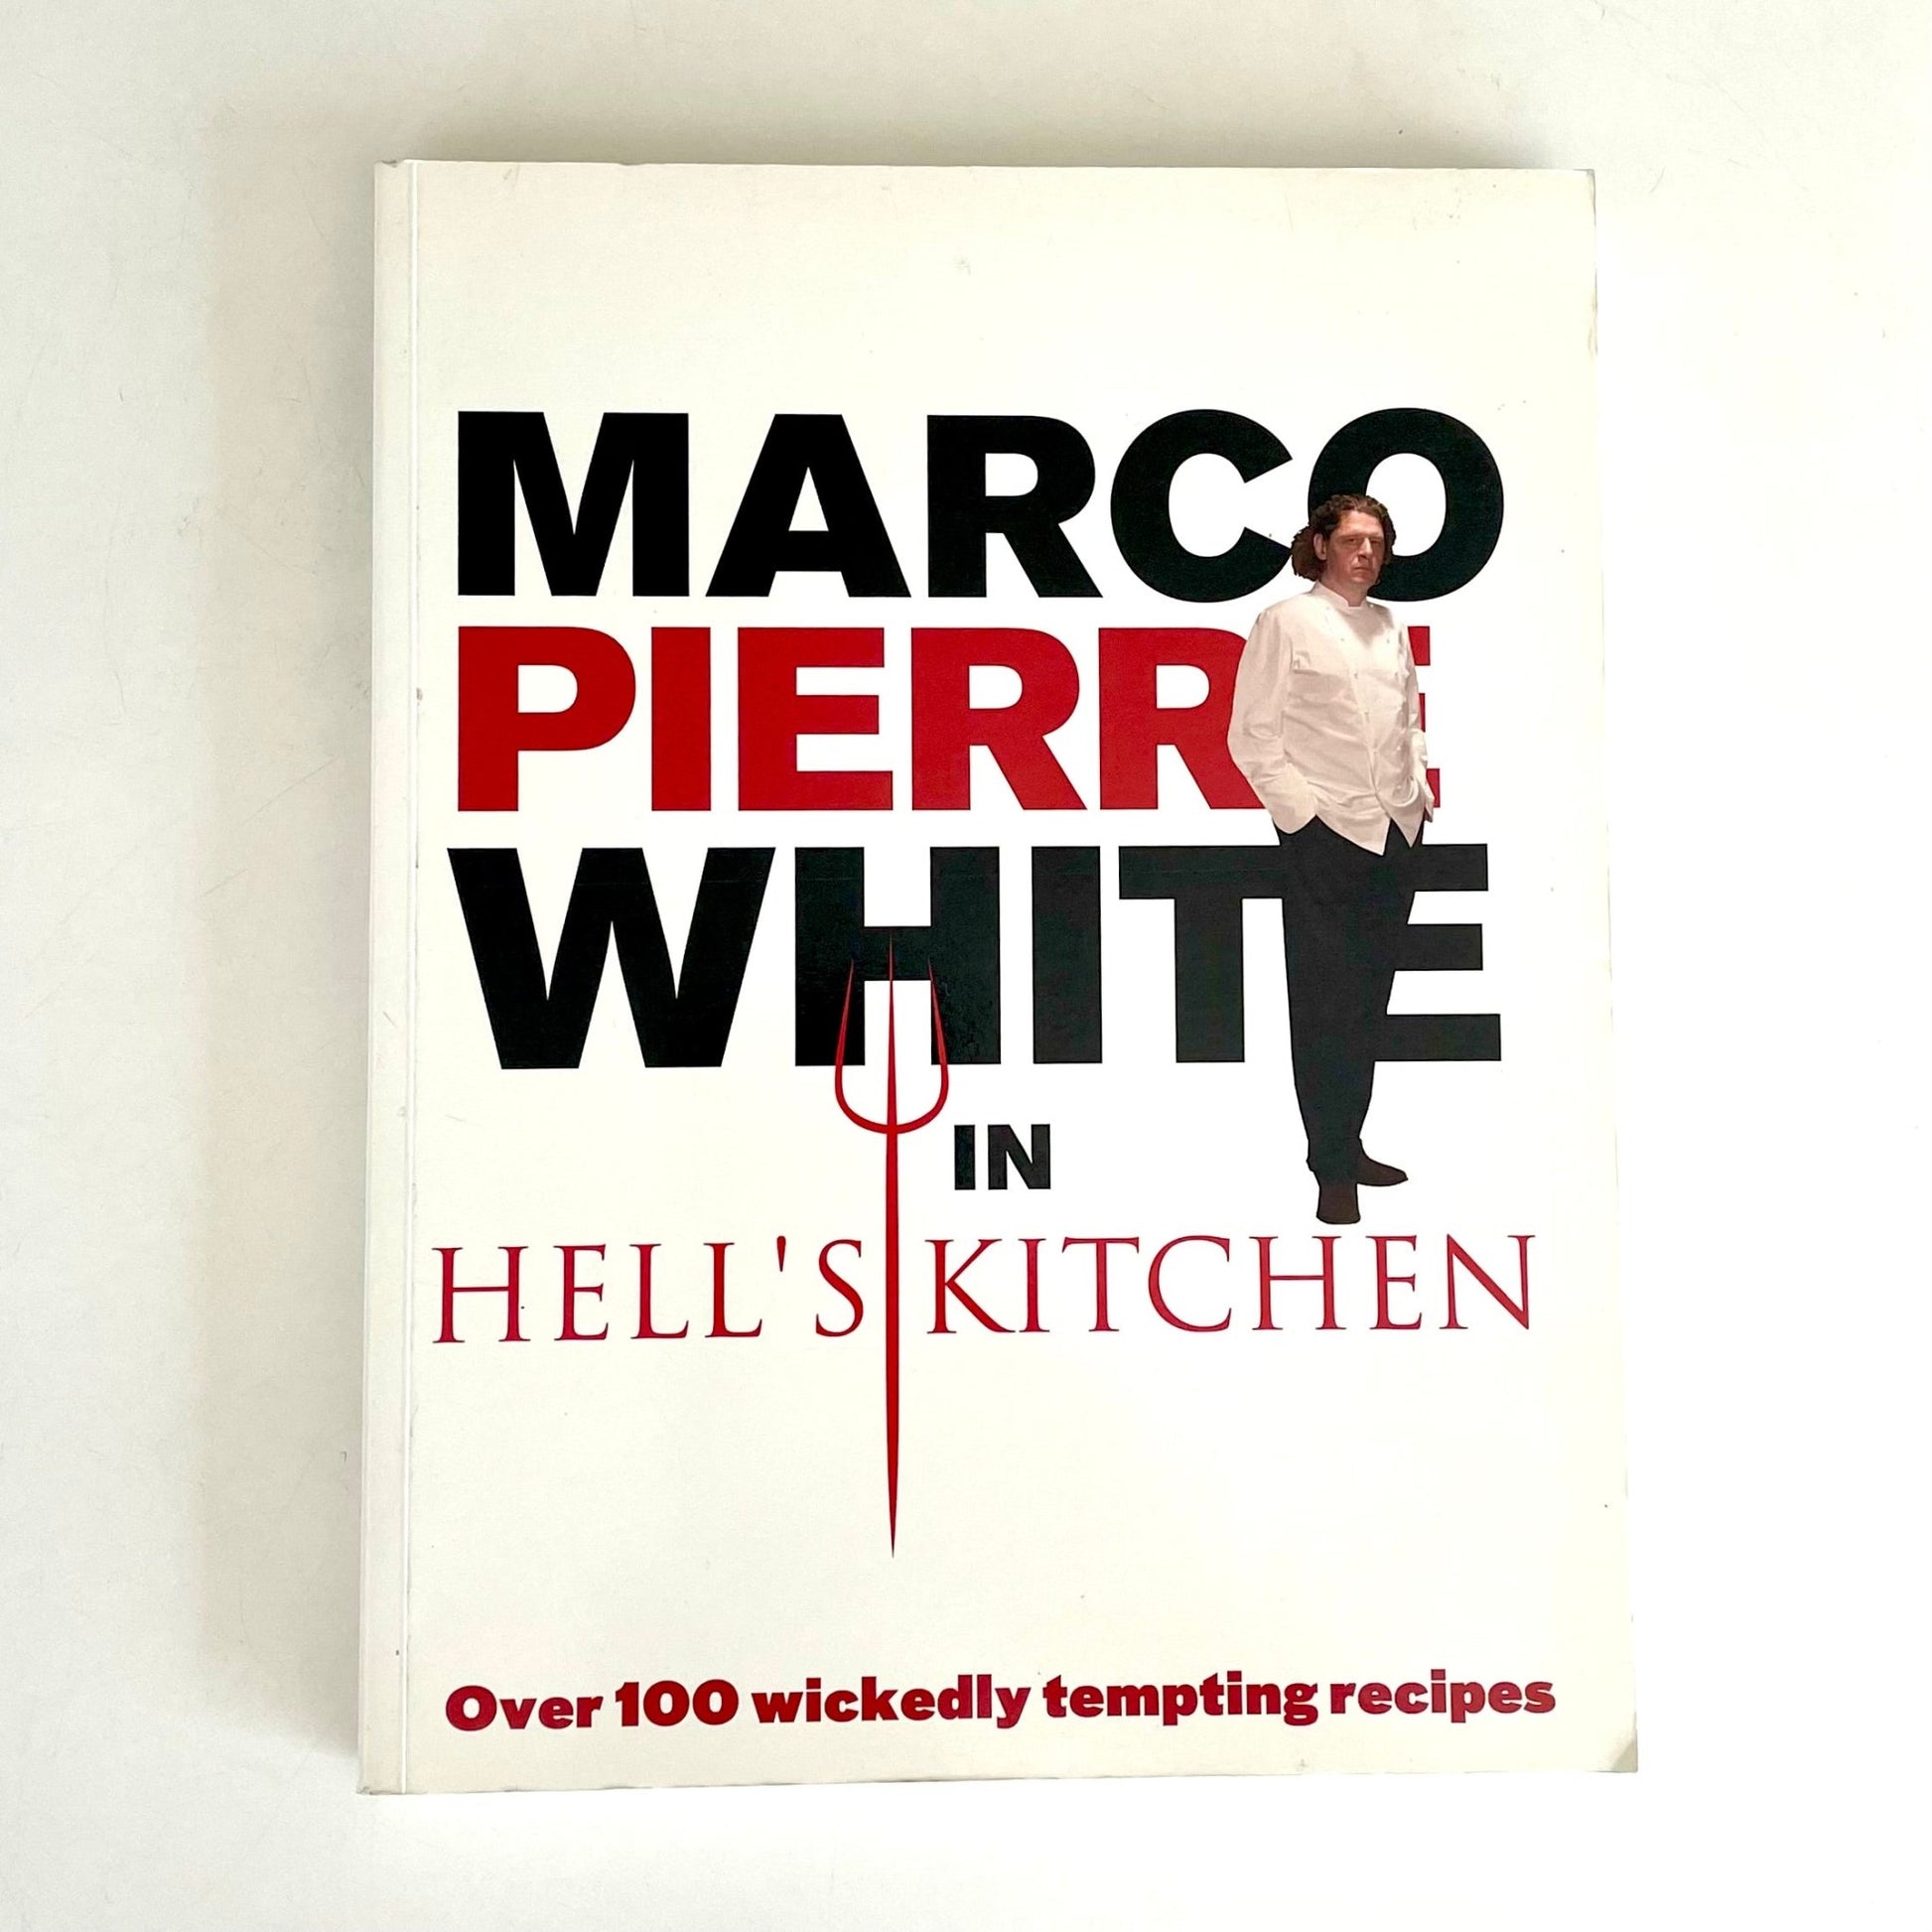 Hell’s Kitchen by Marco Pierre White - TrueCooks